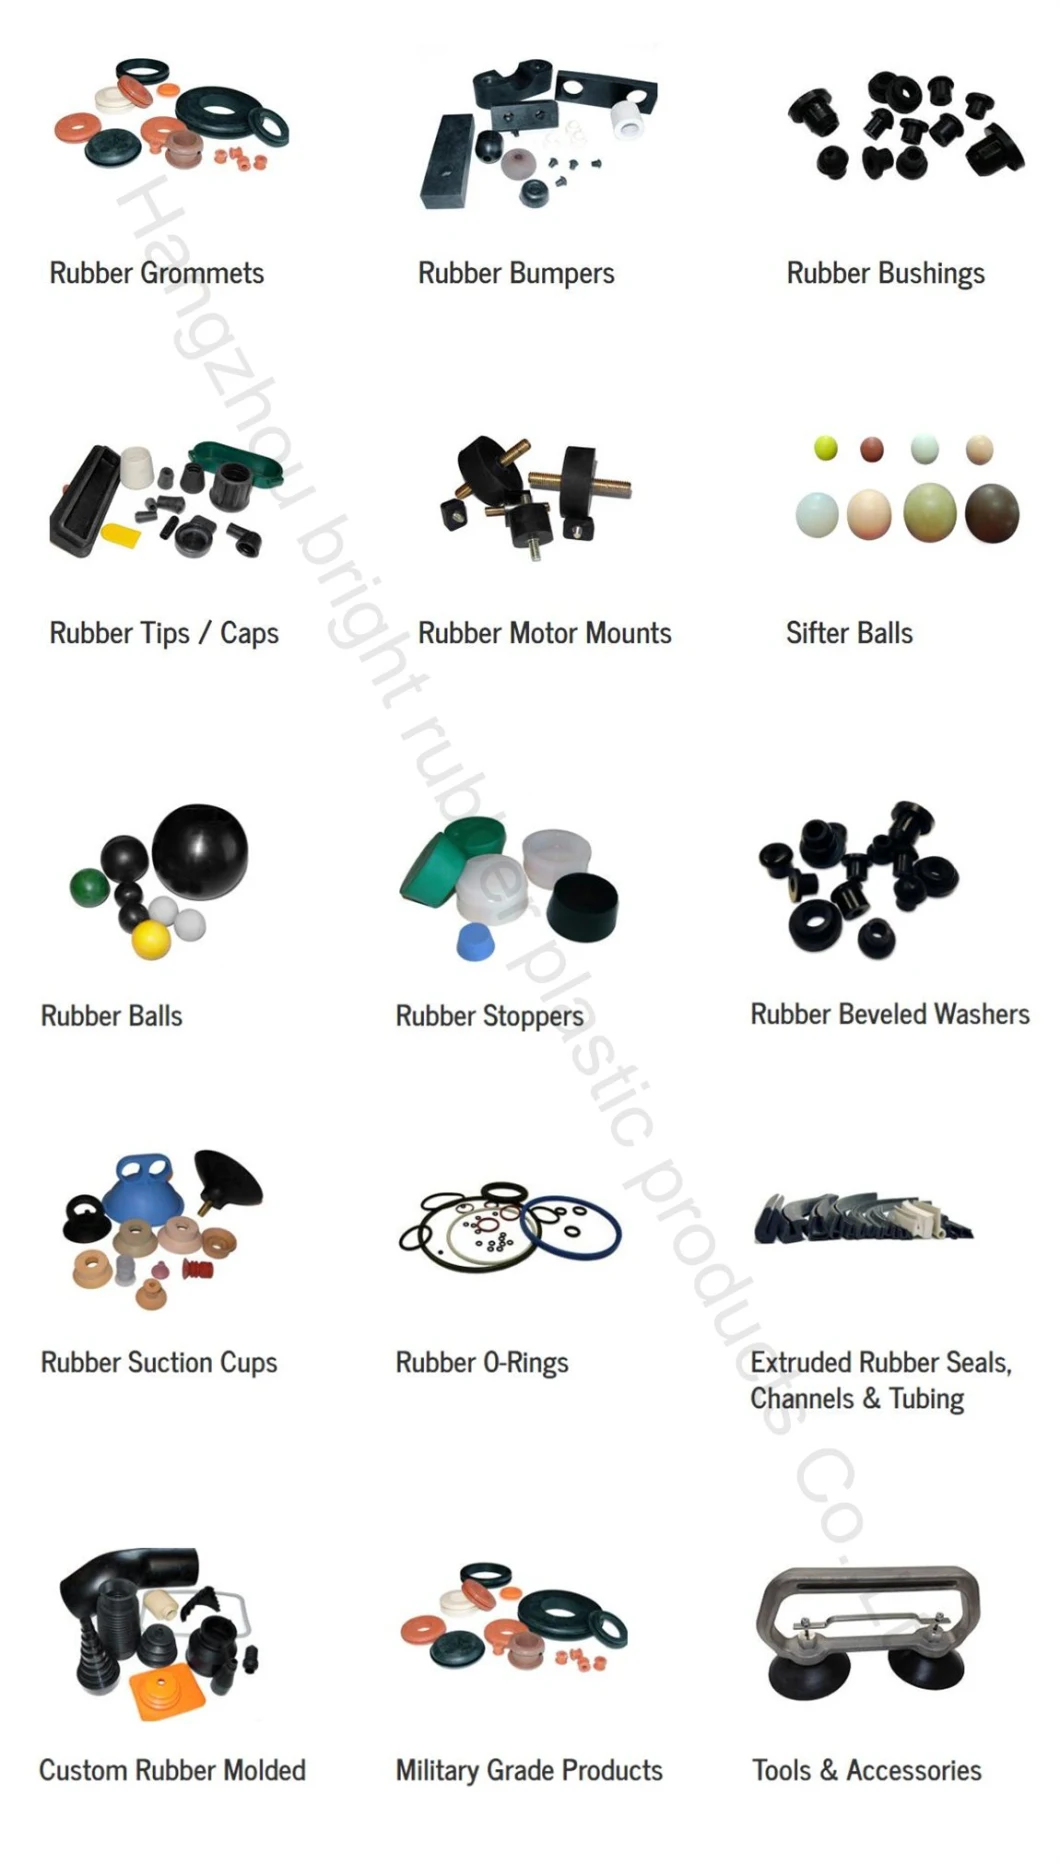 Rubber O Ring/Silicone O-Ring/Color Rubber O Ring Parts